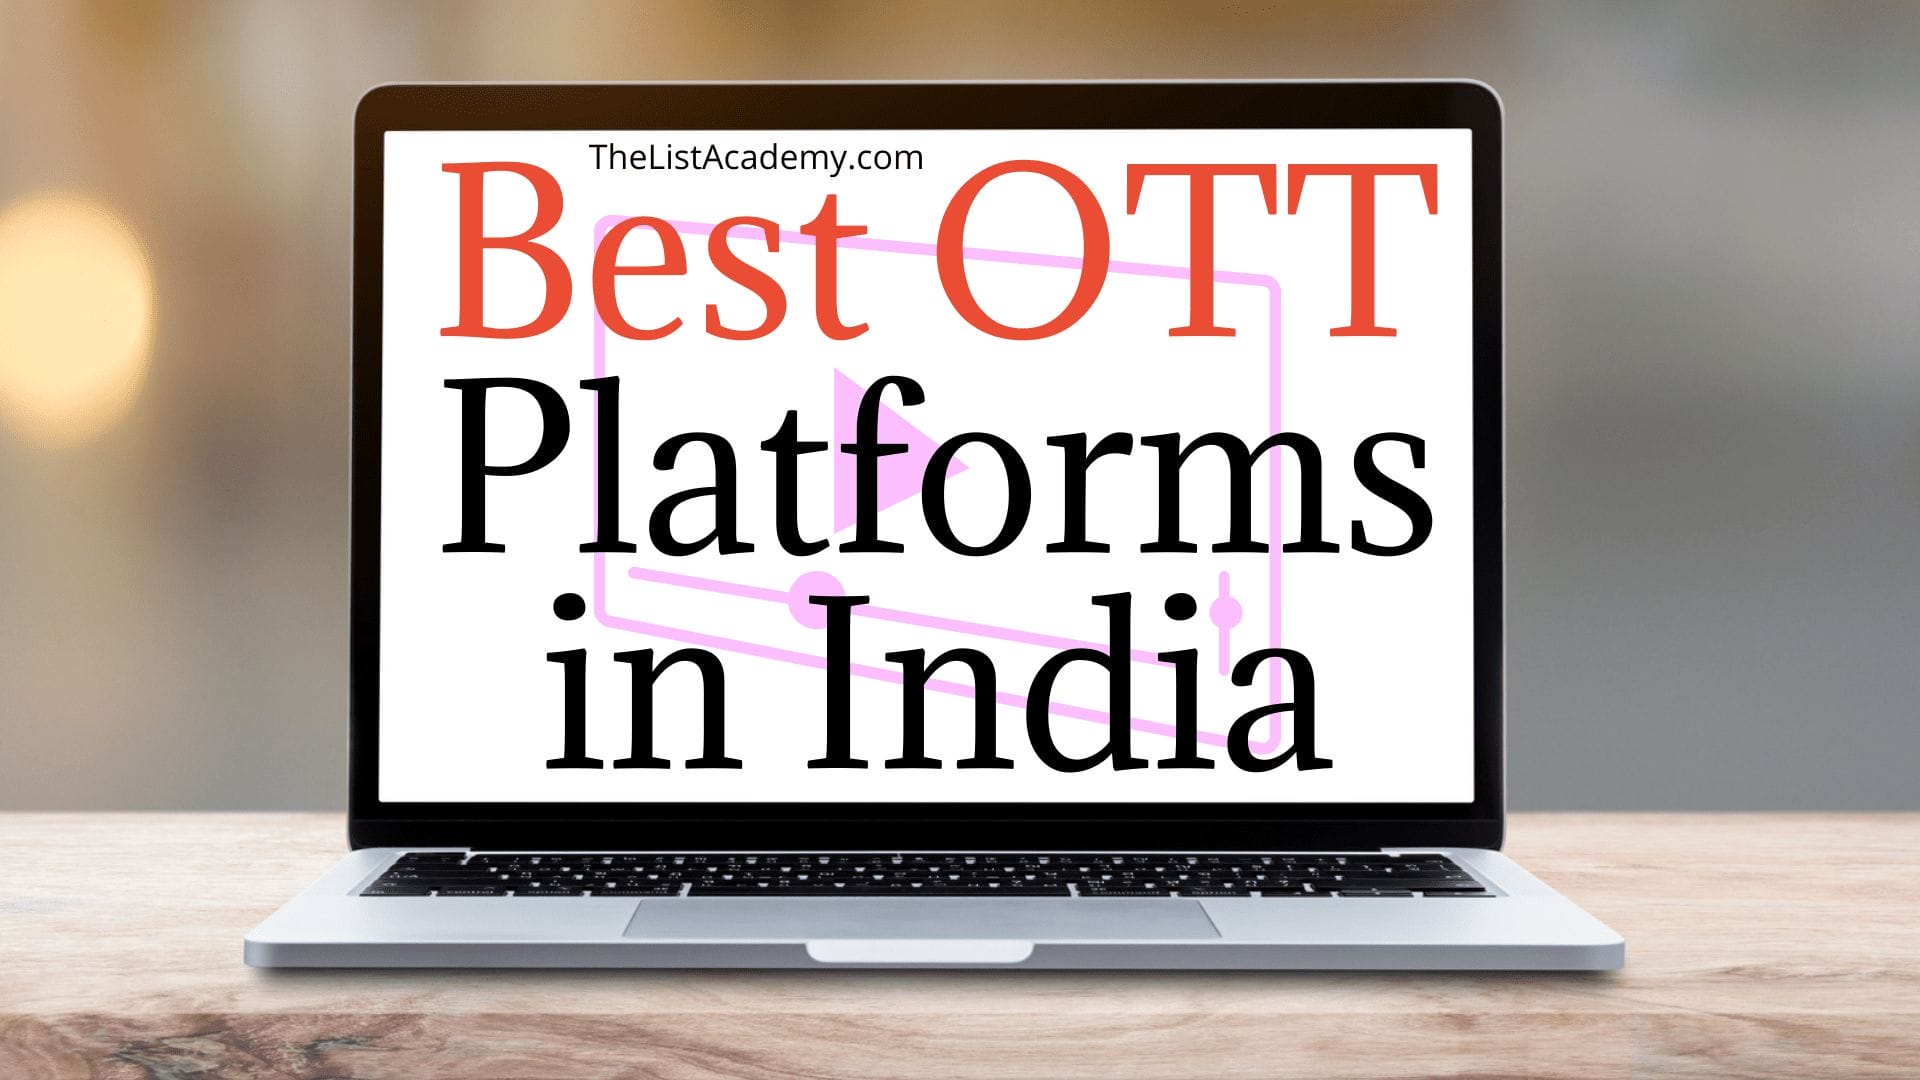 Cover Image For List : 37 Best Ott Platforms In India